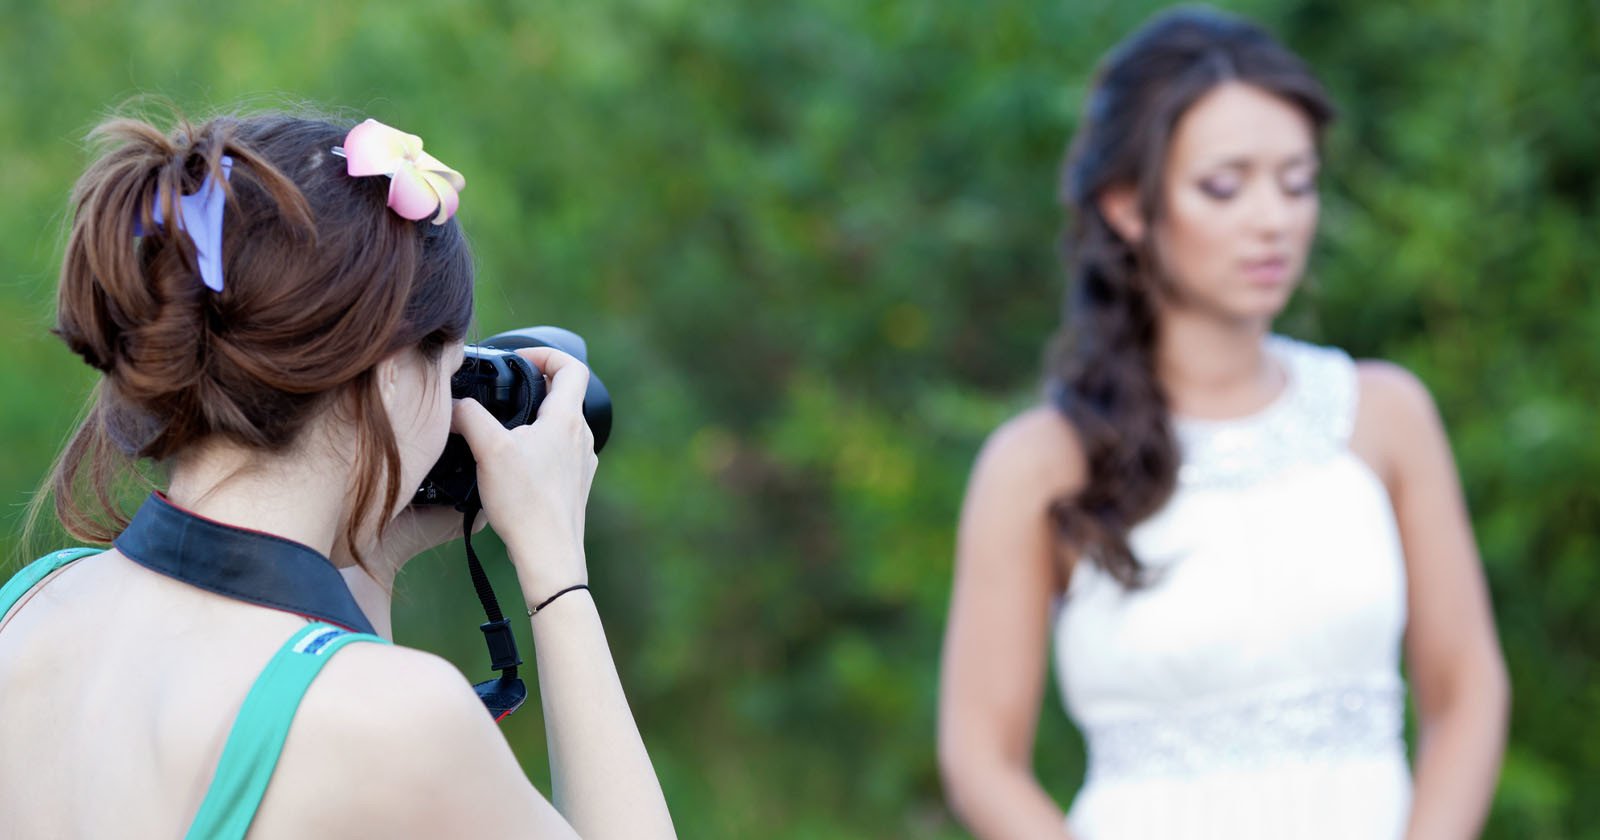  officials warn about wedding photographer who never shows 